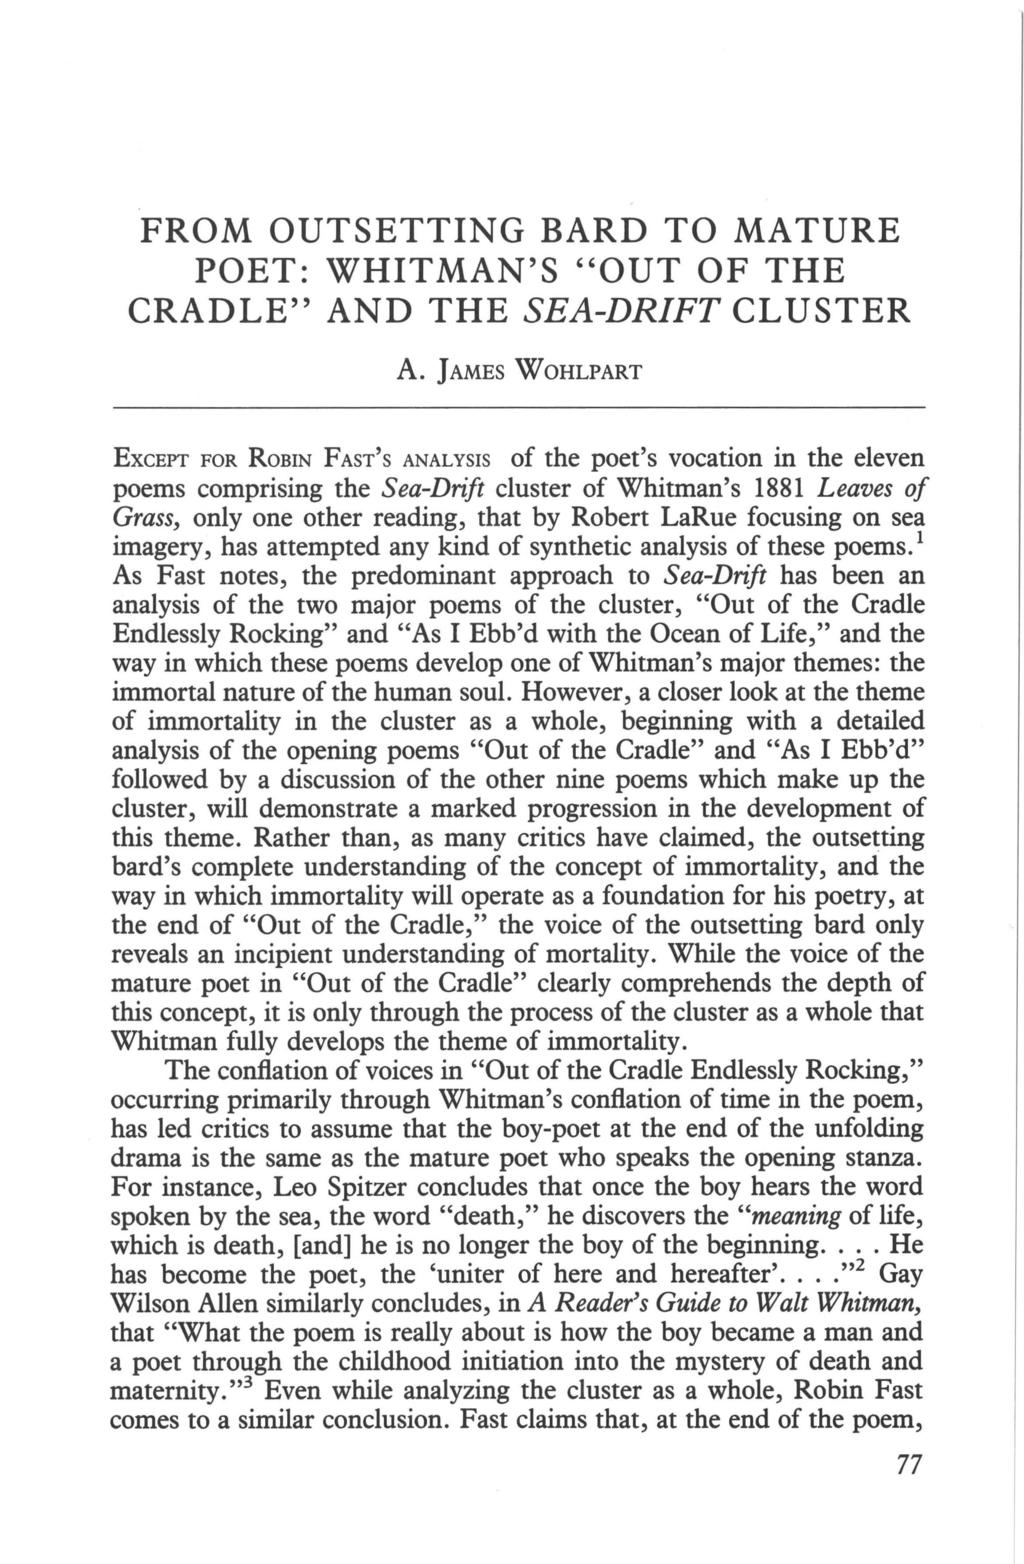 FROM OUTSETTING BARD TO MATURE POET: WHITMAN'S "OUT OF THE CRADLE" AND THE SEA-DRIFT CLUSTER A.